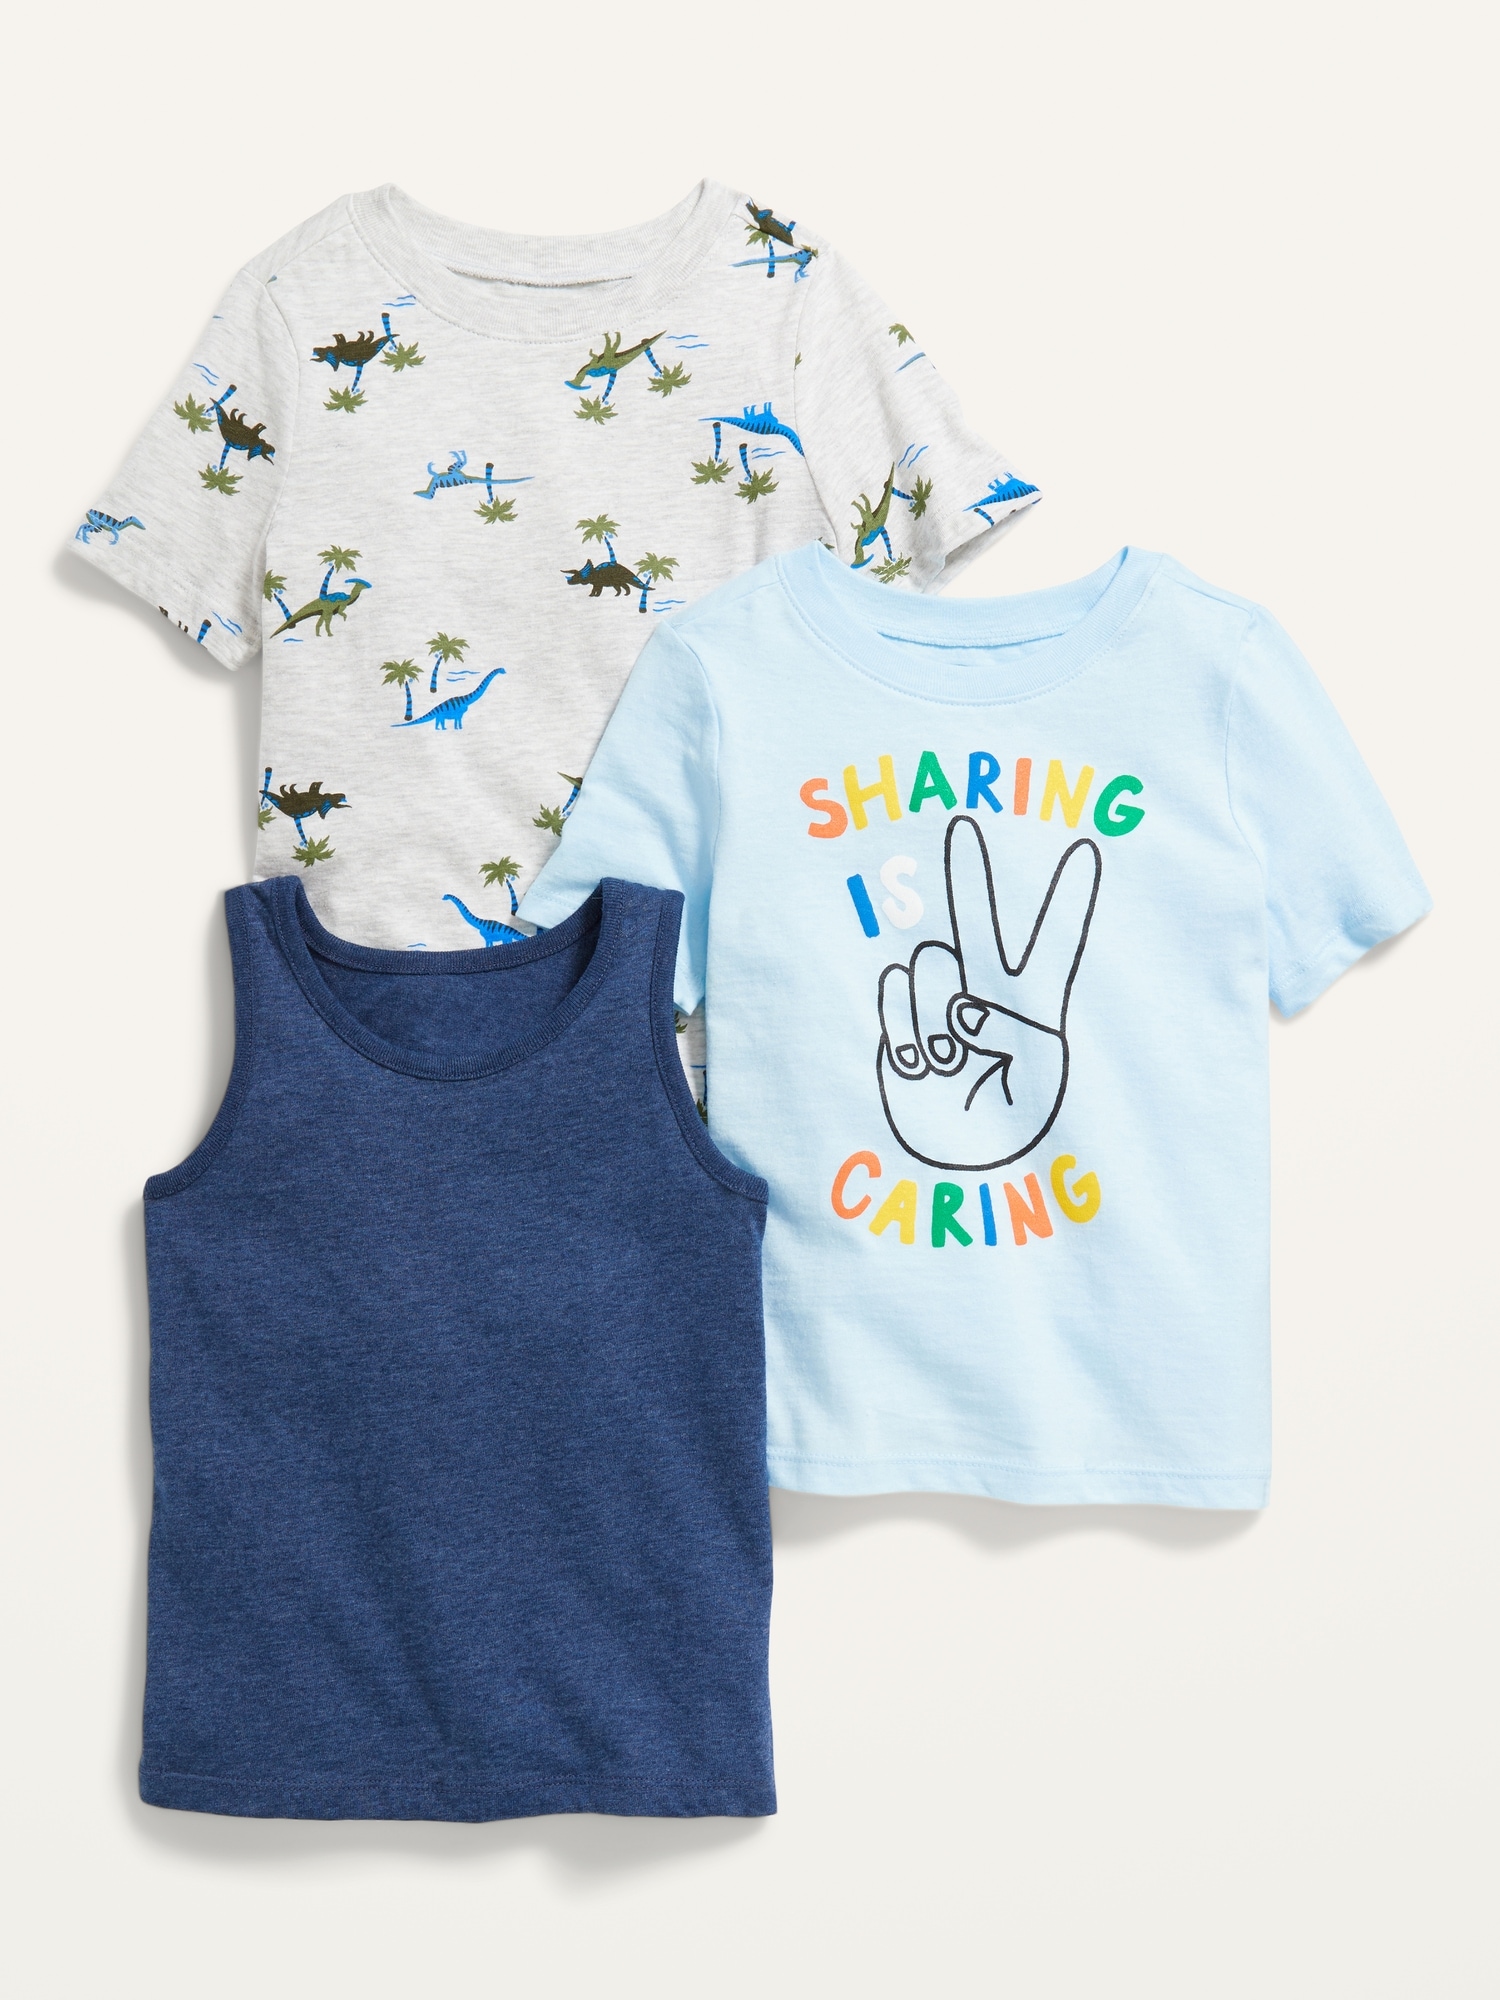 Unisex 3-Pack Tees and Tank Top for Toddler